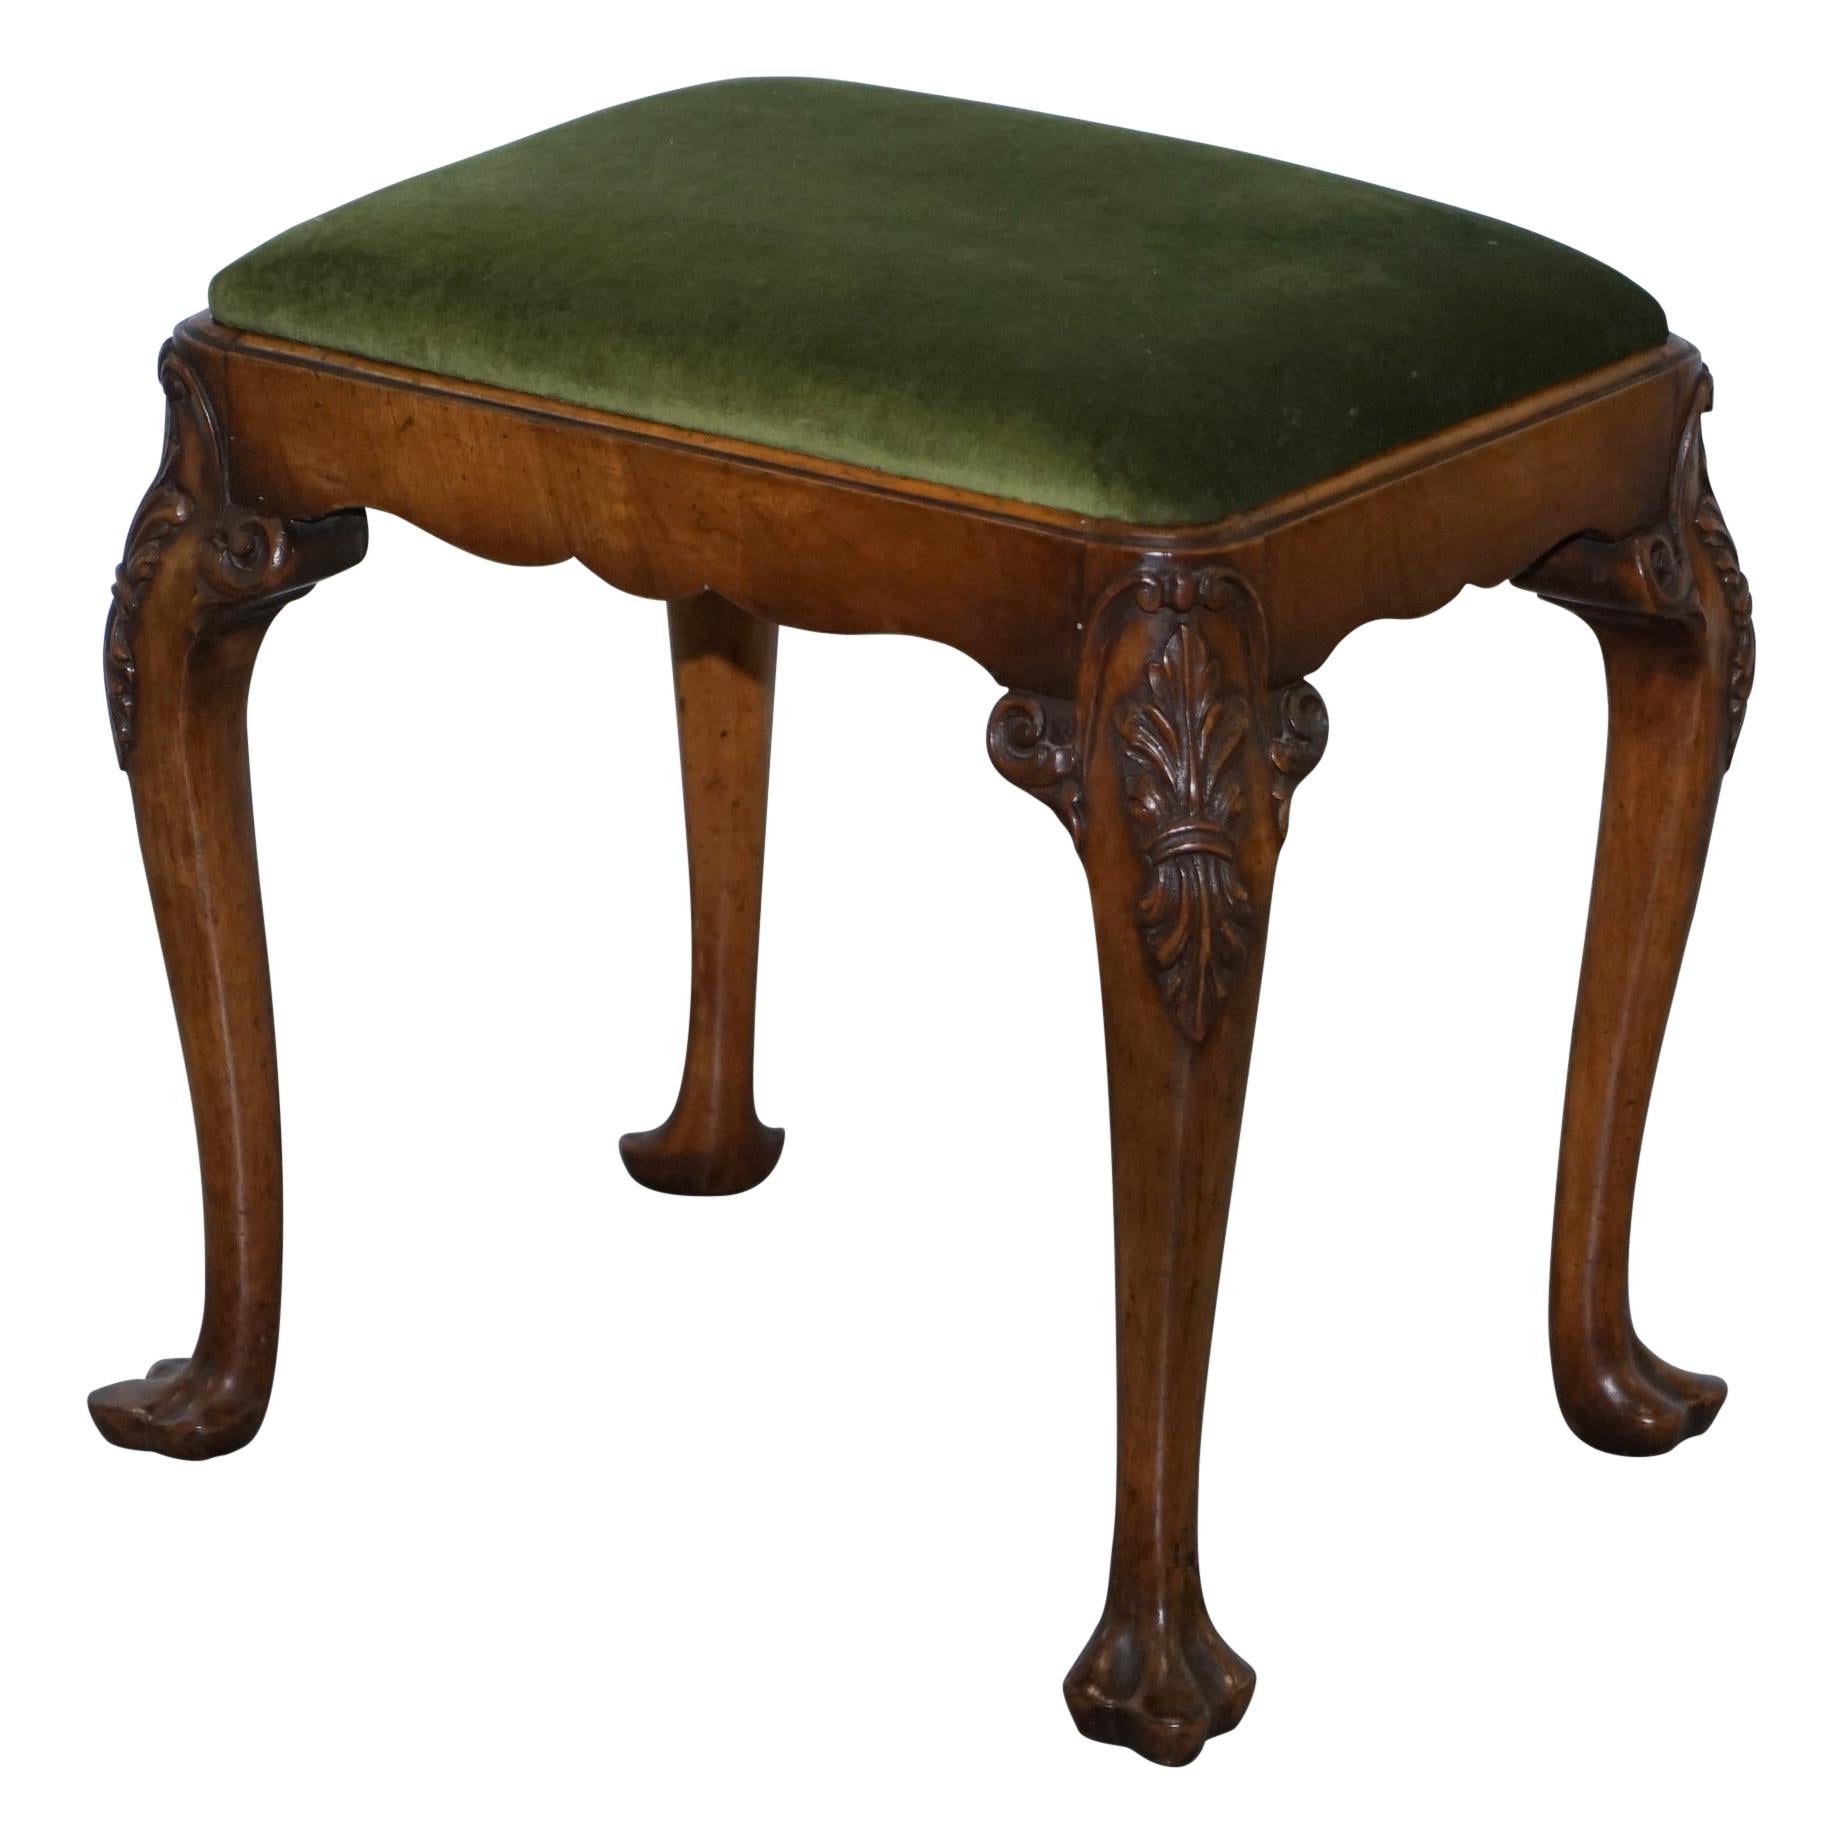 Stunning Victorian Hand Carved Cabriolet Leg Stool with Green Velour Seat Pad